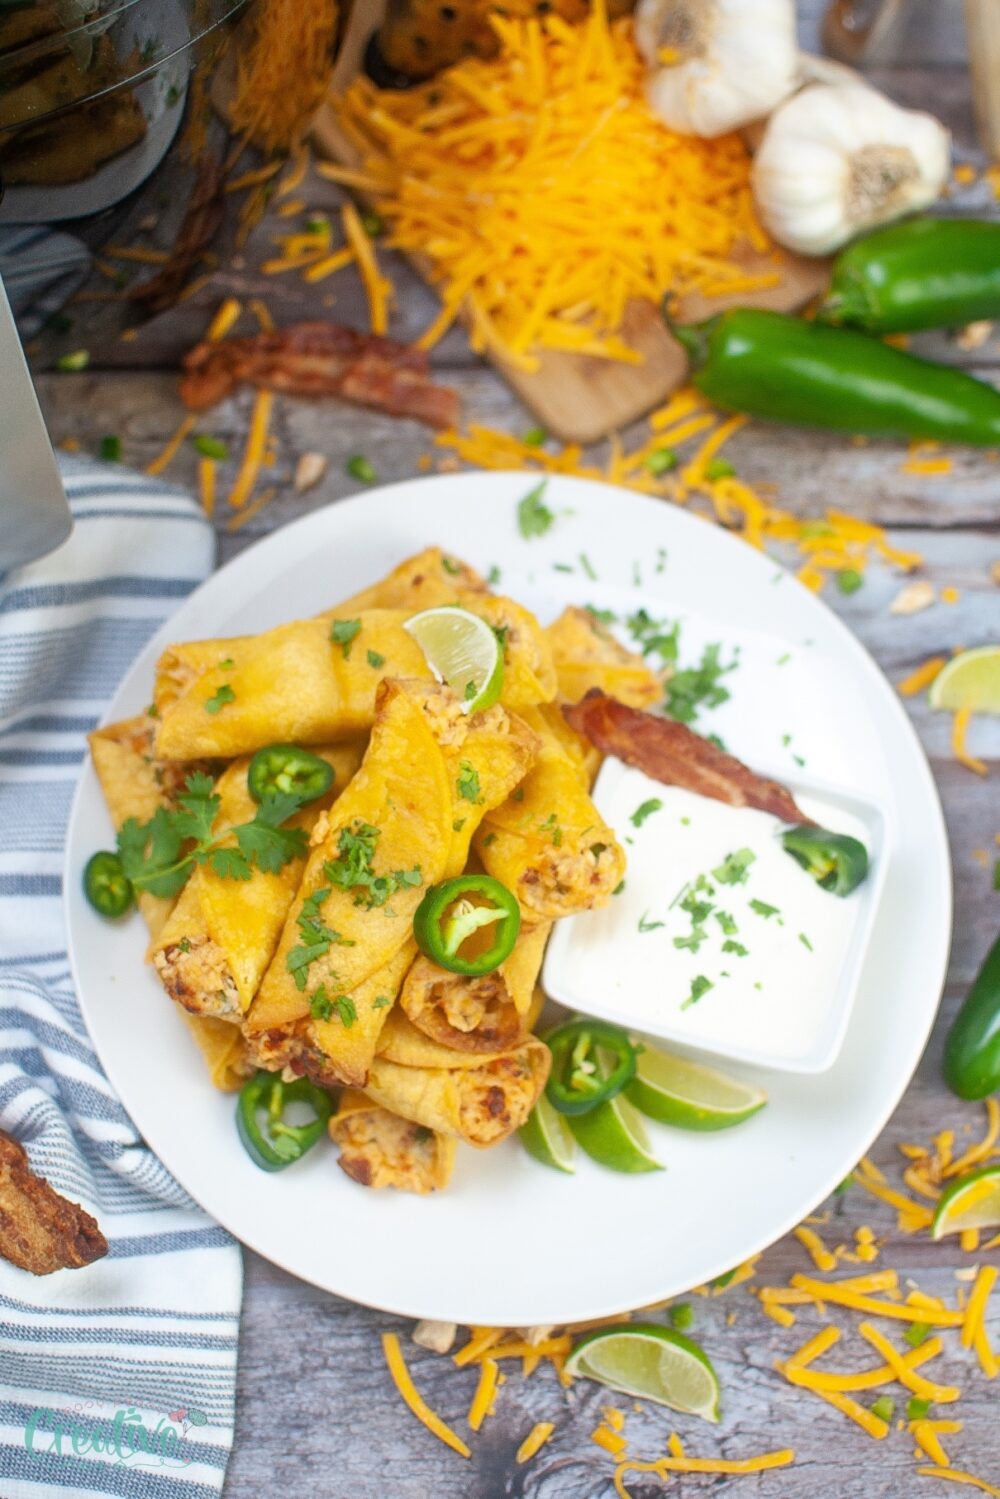 Spicy taquitos: hot, creamy, and satisfying. Perfect blend of flavors for a unique and flavorful snack. Great for any occasion!